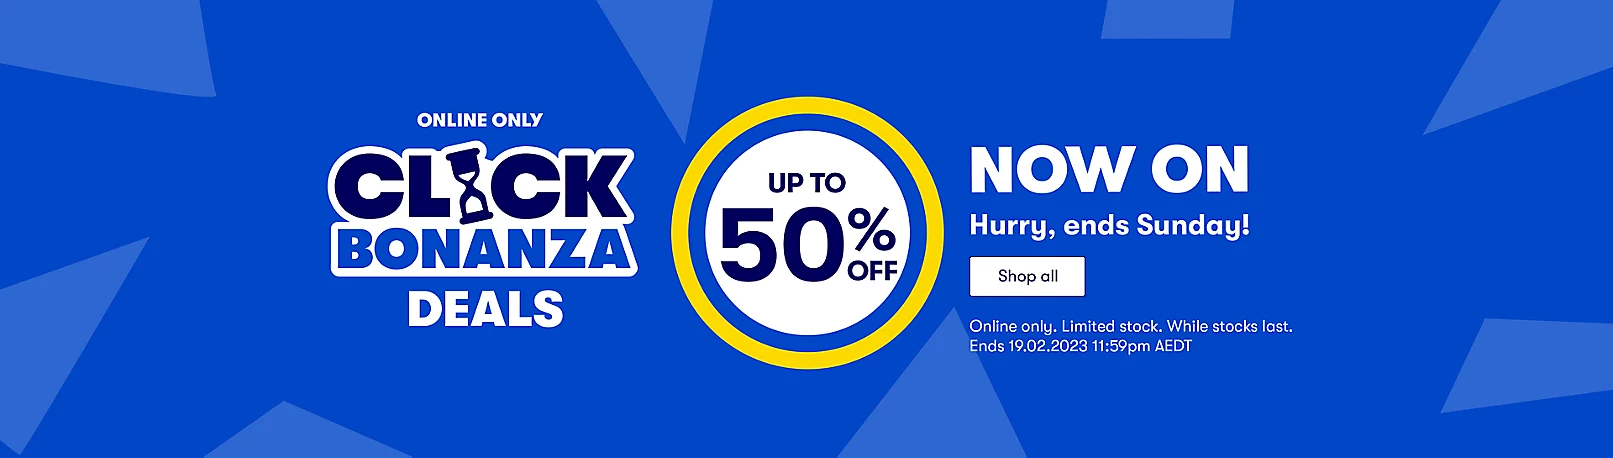 Big W Click sale: Up to 50% OFF on books, toys, tvs, carseats, shoes